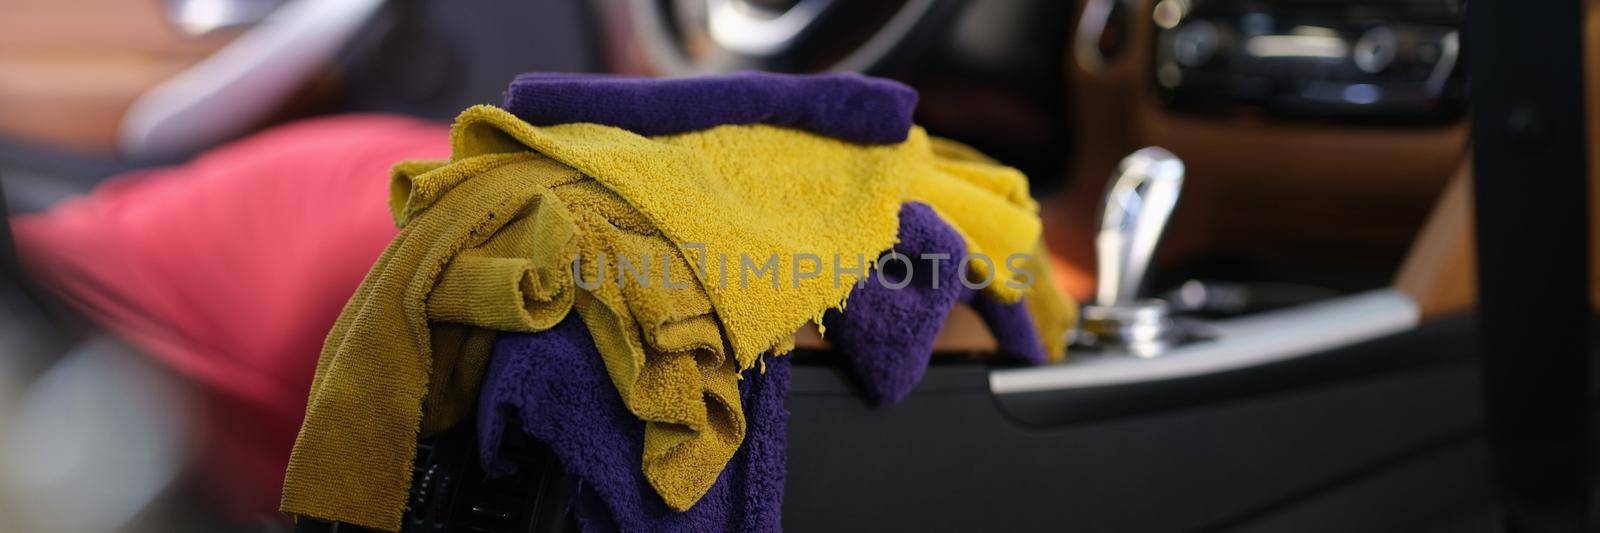 Multicolored microfiber rags lying in car interior closeup. Car cleaning service concept